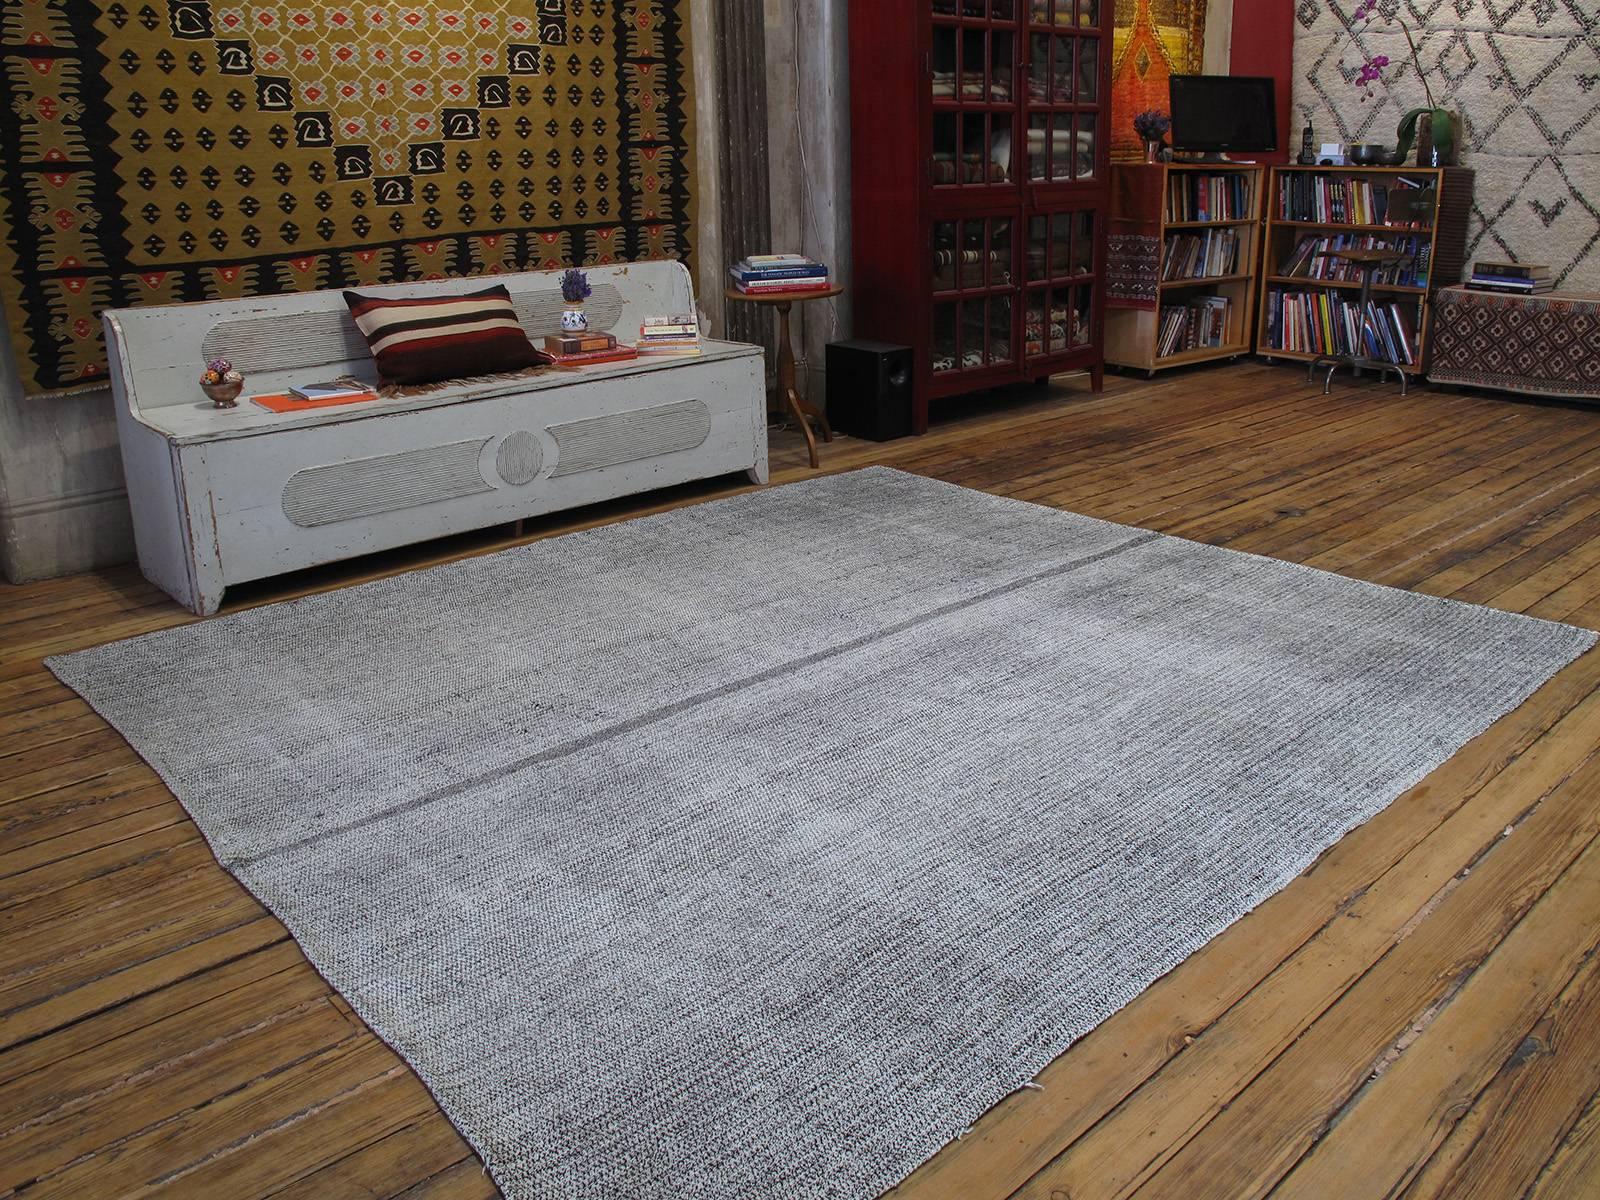 An old tribal flat-weave from Southeastern Turkey, woven for everyday utilitarian use, with an ingenious mixture of goat hair and cotton. Surprisingly elegant with great Modern / Minimalist appeal. Unusually wide and square-ish format.